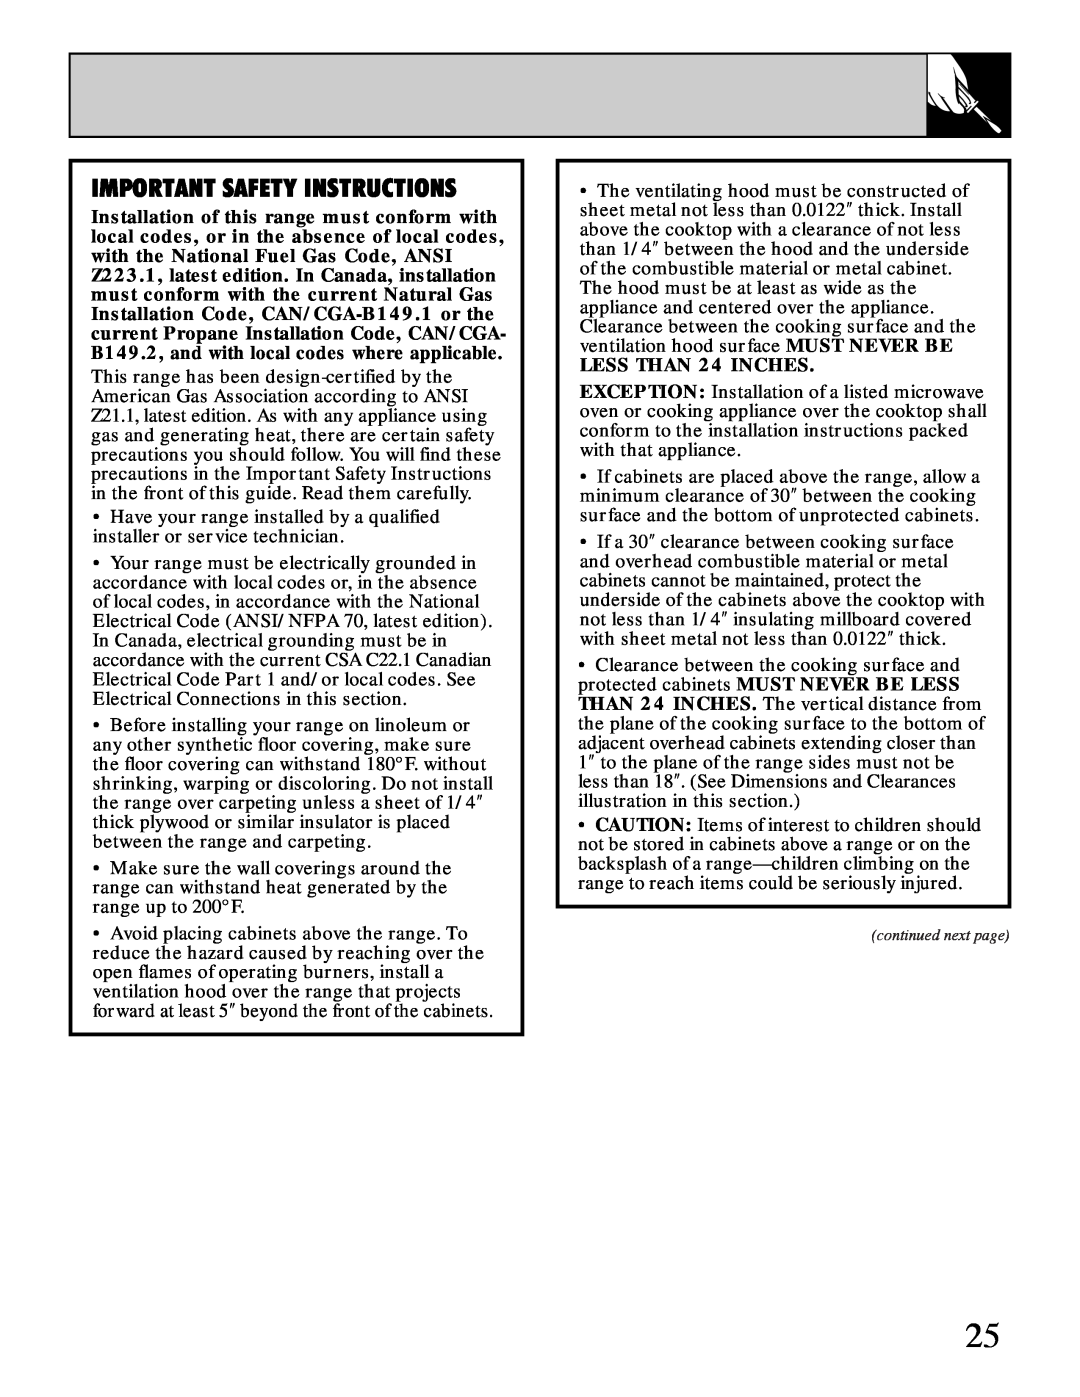 Hotpoint RGB506 installation instructions Important Safety Instructions, LESS THAN 24 INCHES 